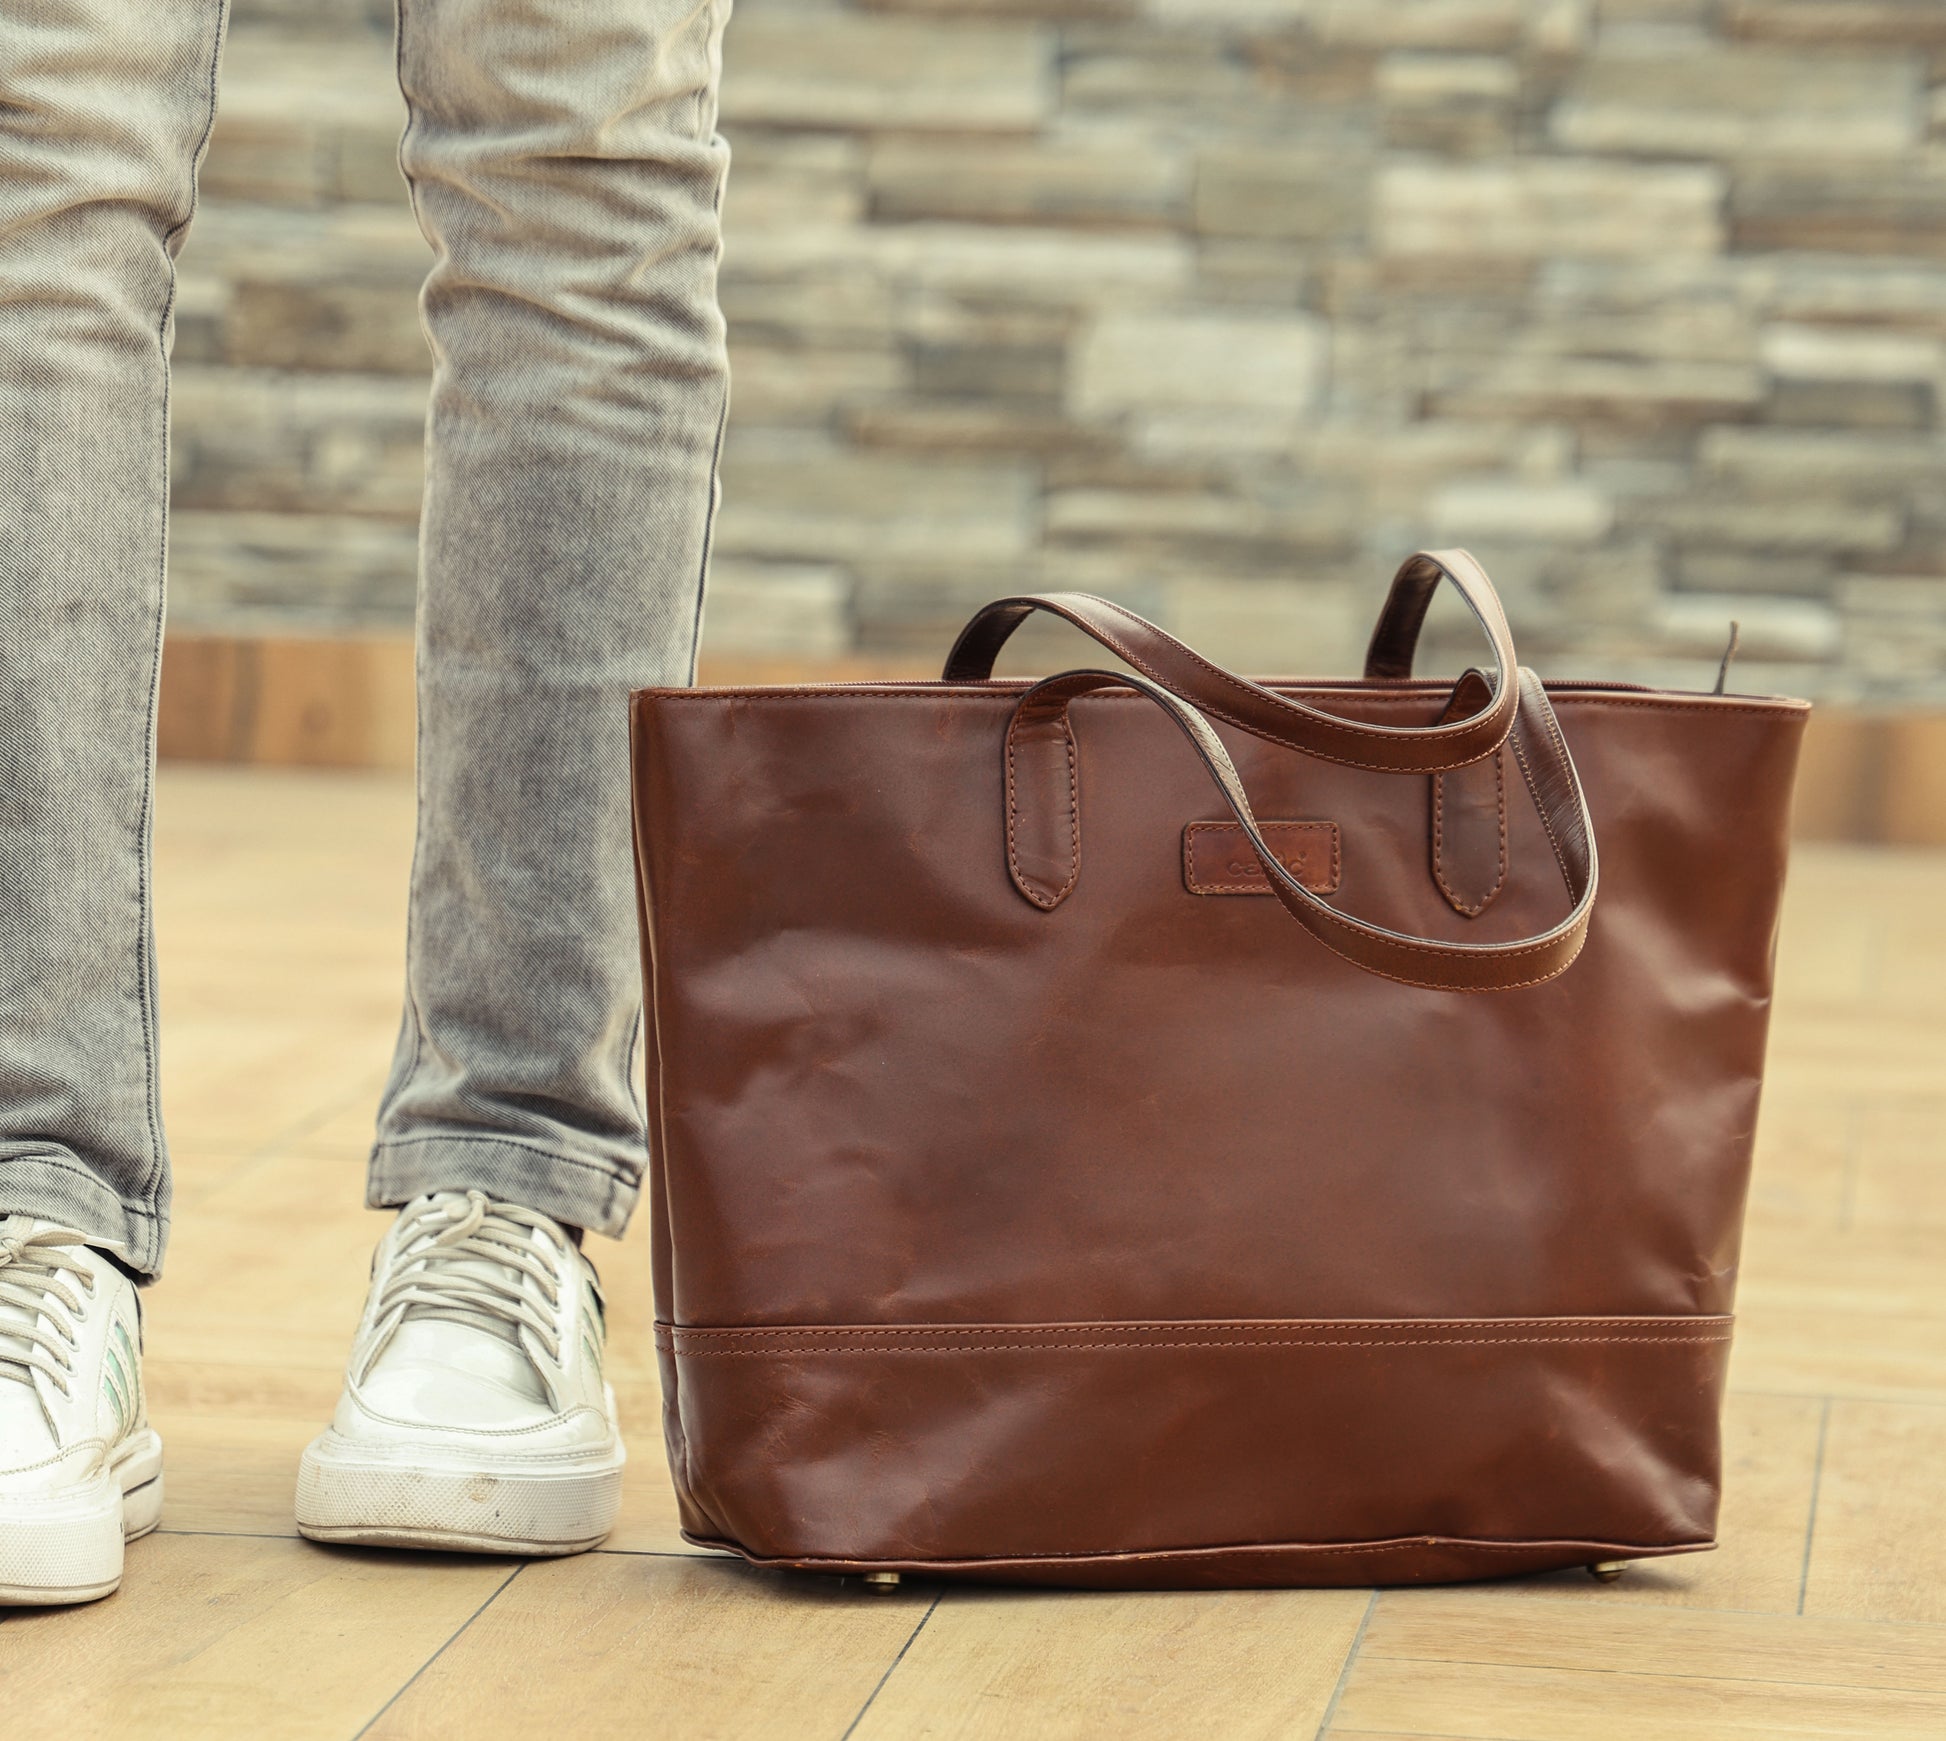 Luxurious Leather Tote Bags for Effortless Style and Everyday Sophistication. - CELTICINDIA